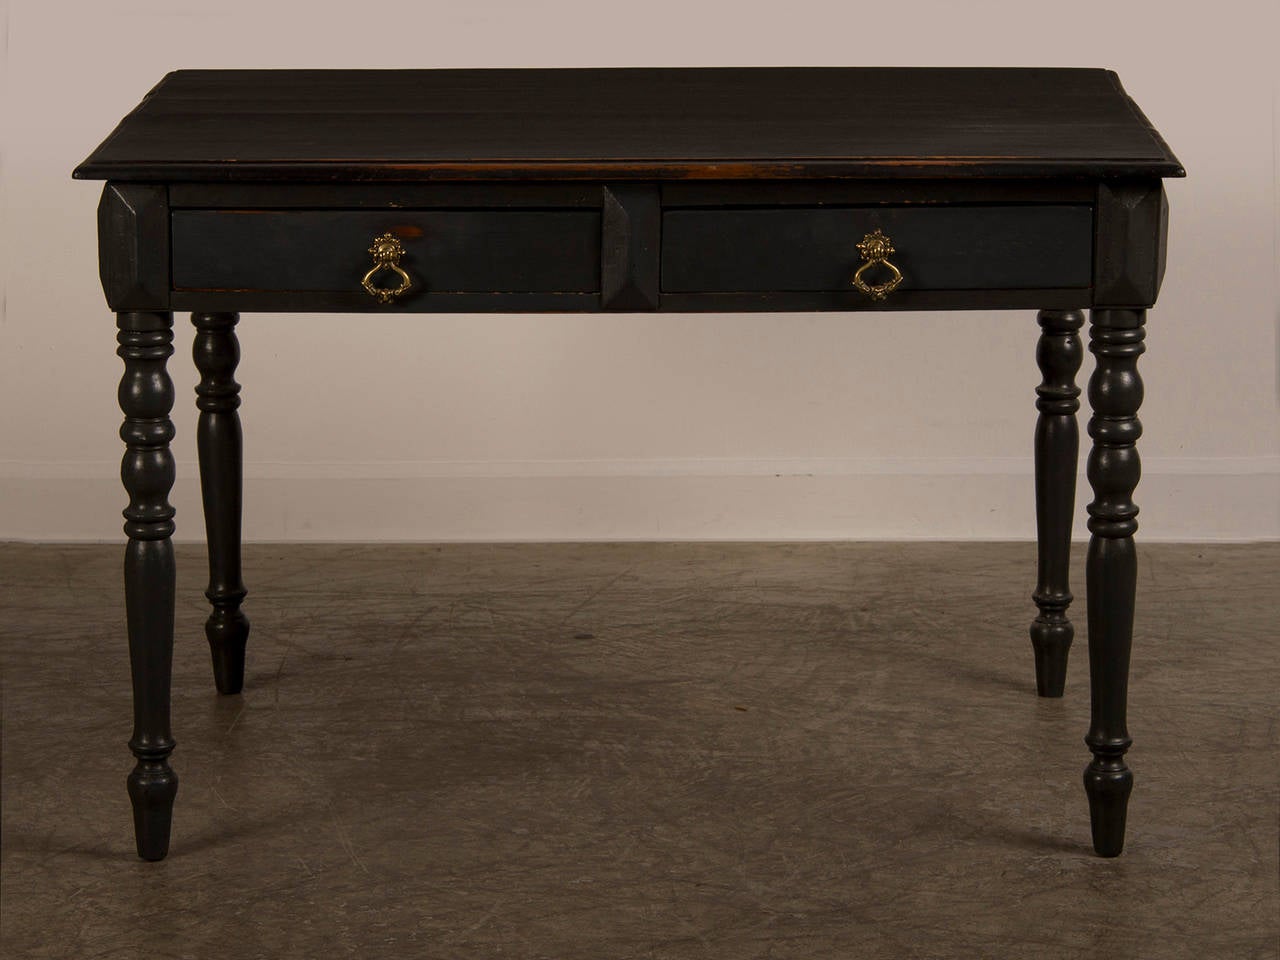 Receive our new selections direct from 1stdibs by email each week. Please click Follow Dealer below and see them first!

An antique French painted writing table circa 1900 with two drawers standing on turned legs. This handsome writing table has a